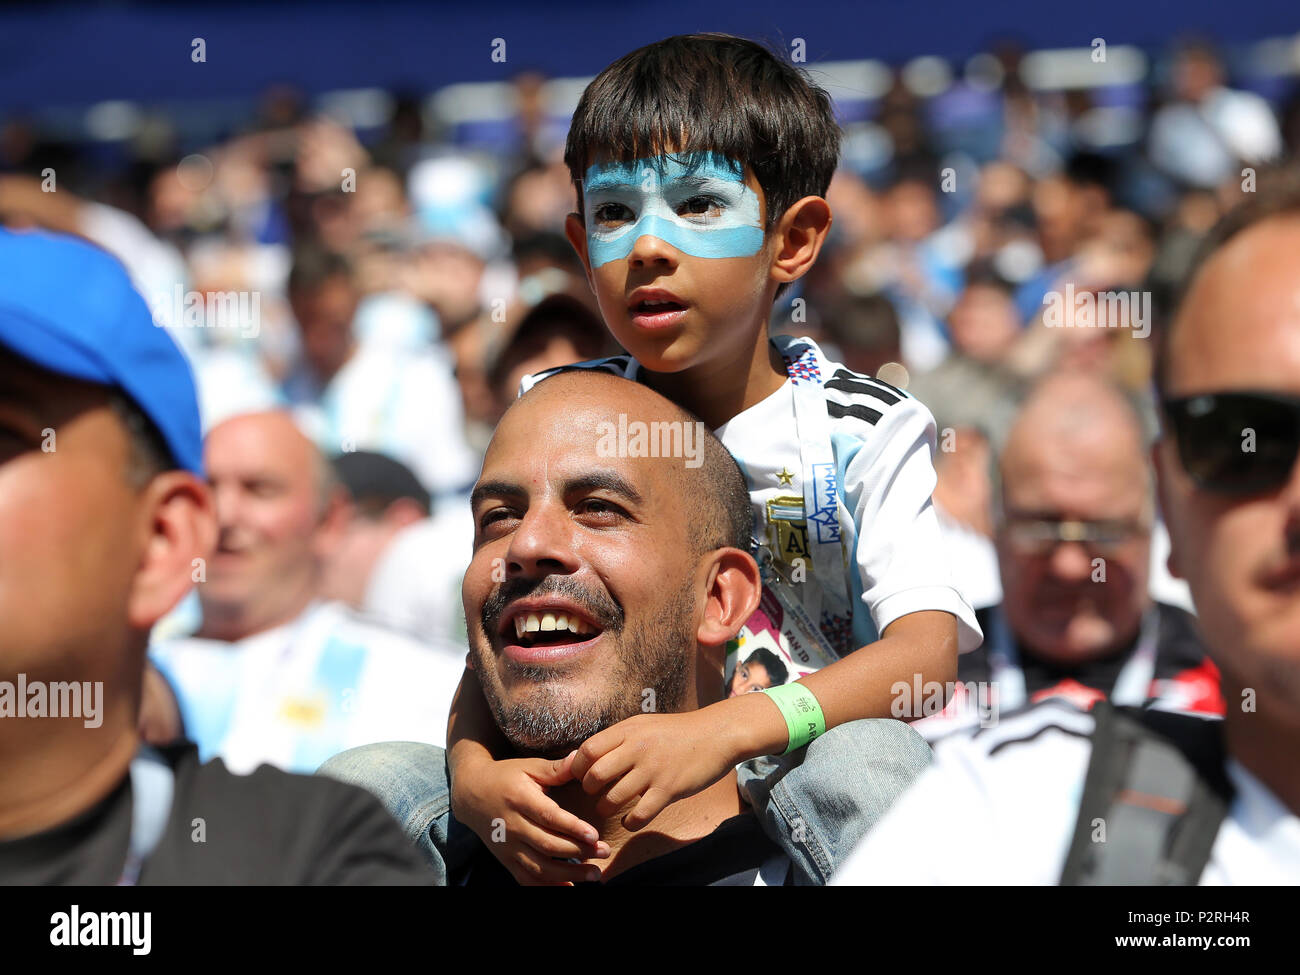 Young Argentina Fan ARGENTINA V ICELAND ARGENTINA V ICELAND, 2018 FIFA WORLD CUP RUSSIA 16 June 2018 GBC8161 2018 FIFA World Cup Russia Spartak Stadium Moscow STRICTLY EDITORIAL USE ONLY. If The Player/Players Depicted In This Image Is/Are Playing For An English Club Or The England National Team. Then This Image May Only Be Used For Editorial Purposes. No Commercial Use. The Following Usages Are Also Restricted EVEN IF IN AN EDITORIAL CONTEXT: Use in conjuction with, or part of, any unauthorized audio, video, data, fixture lists, club/league logos, Betting, Games or any 'live Stock Photo